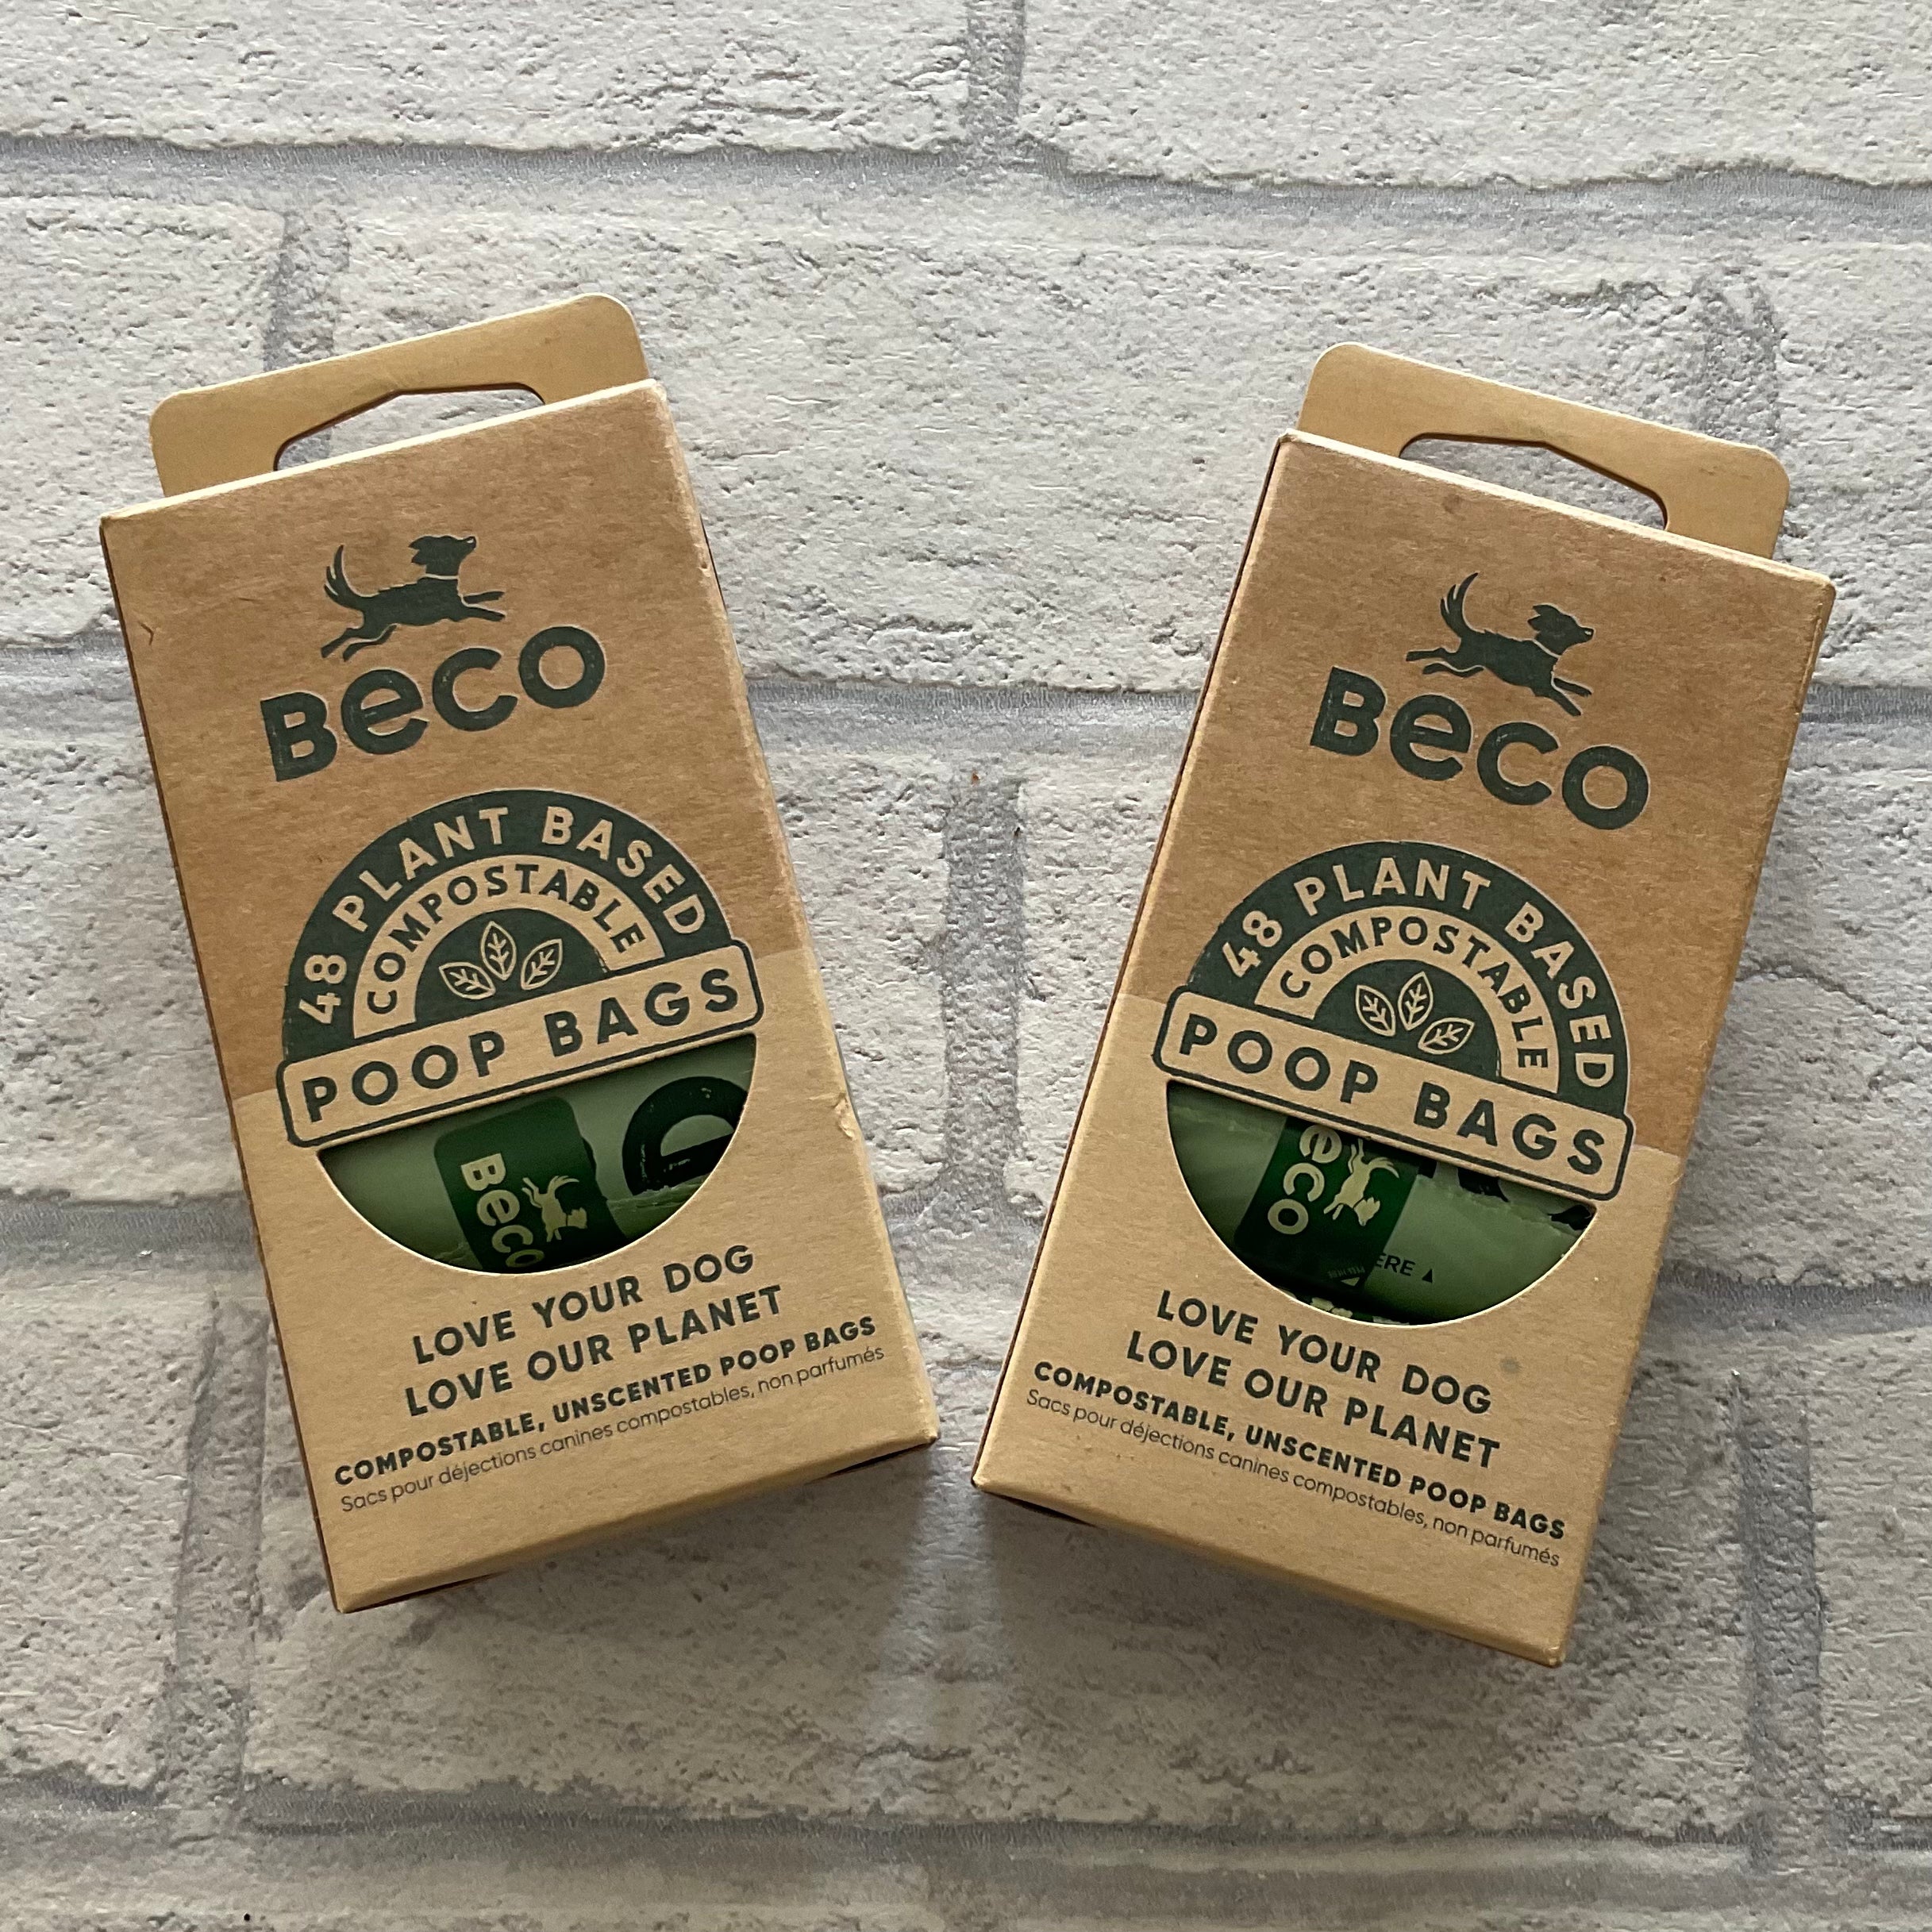 48 Compostable Beco Poop Bags